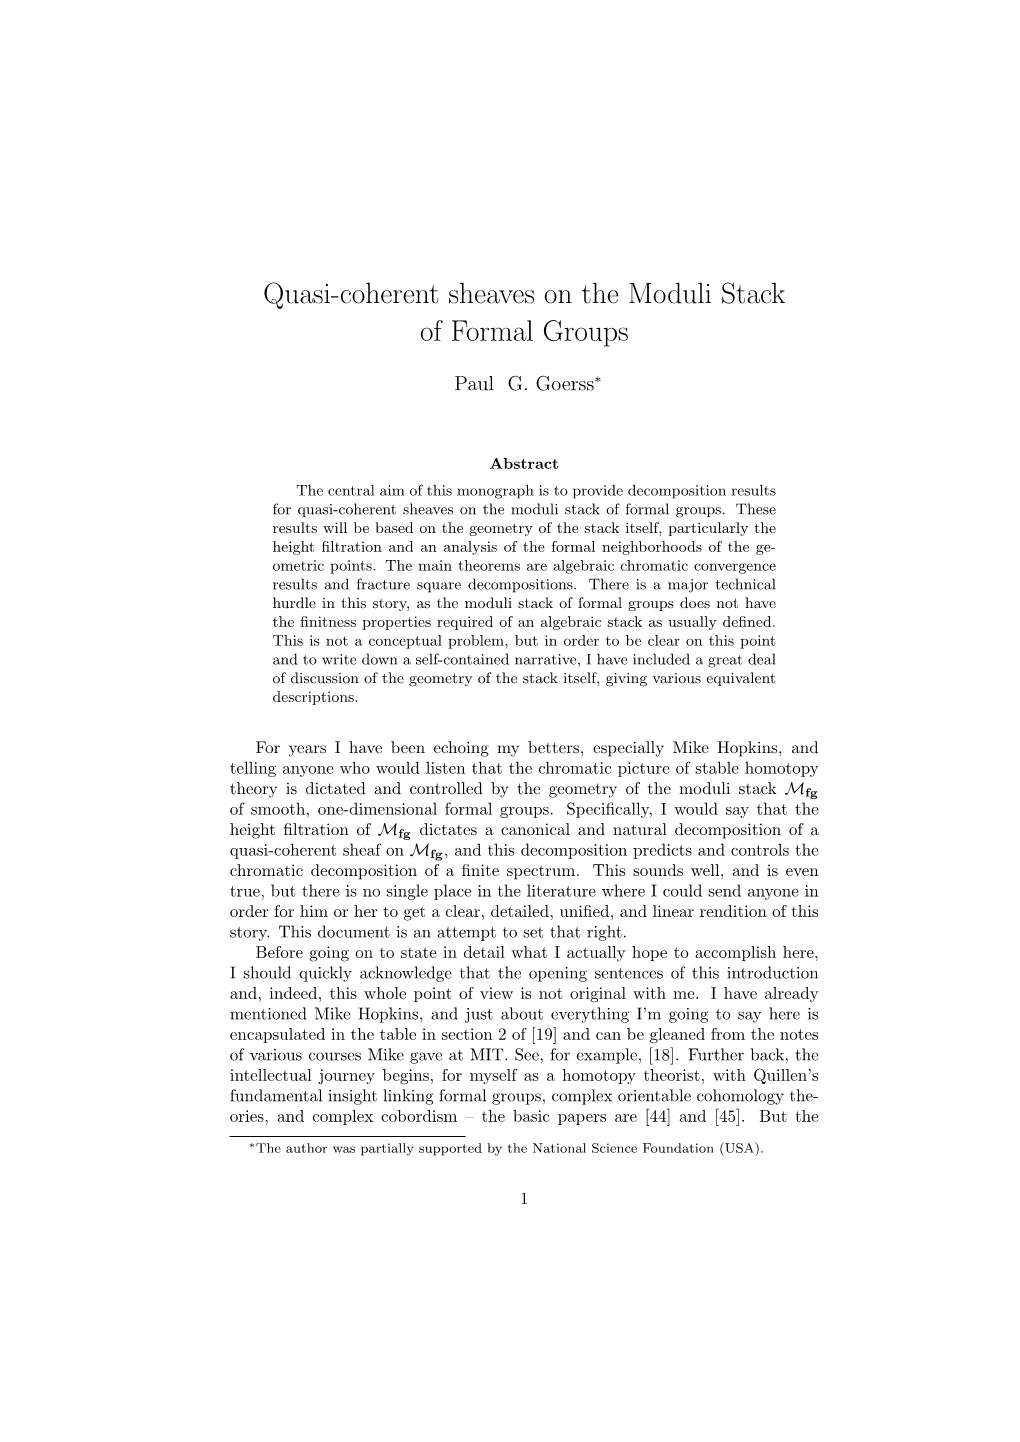 Quasi-Coherent Sheaves on the Moduli Stack of Formal Groups